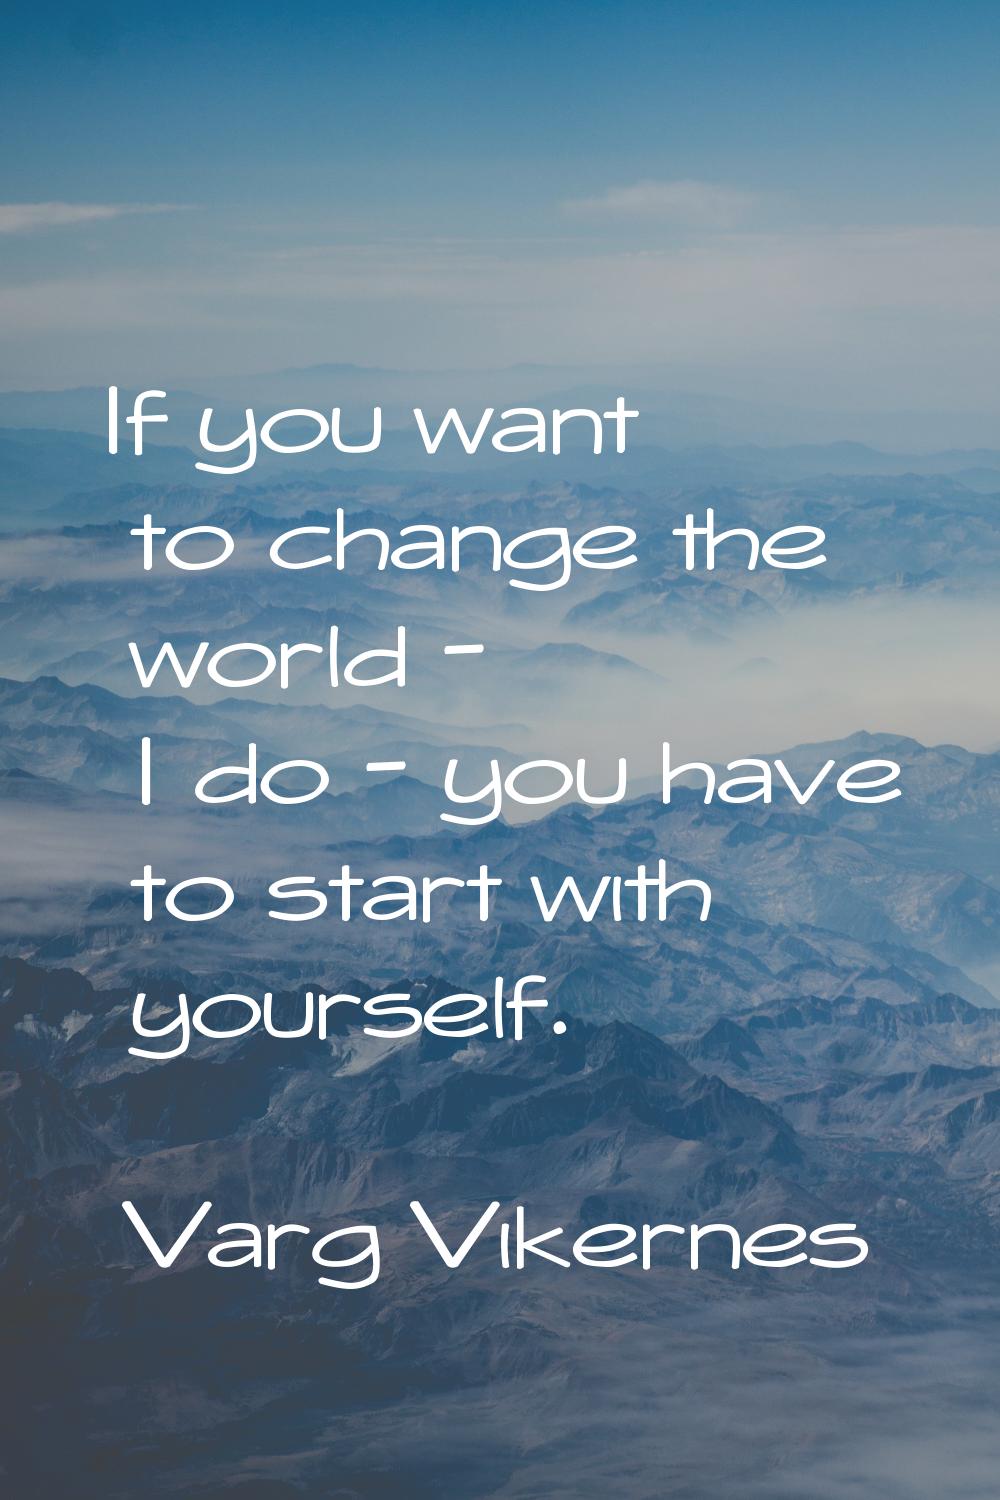 If you want to change the world - I do - you have to start with yourself.